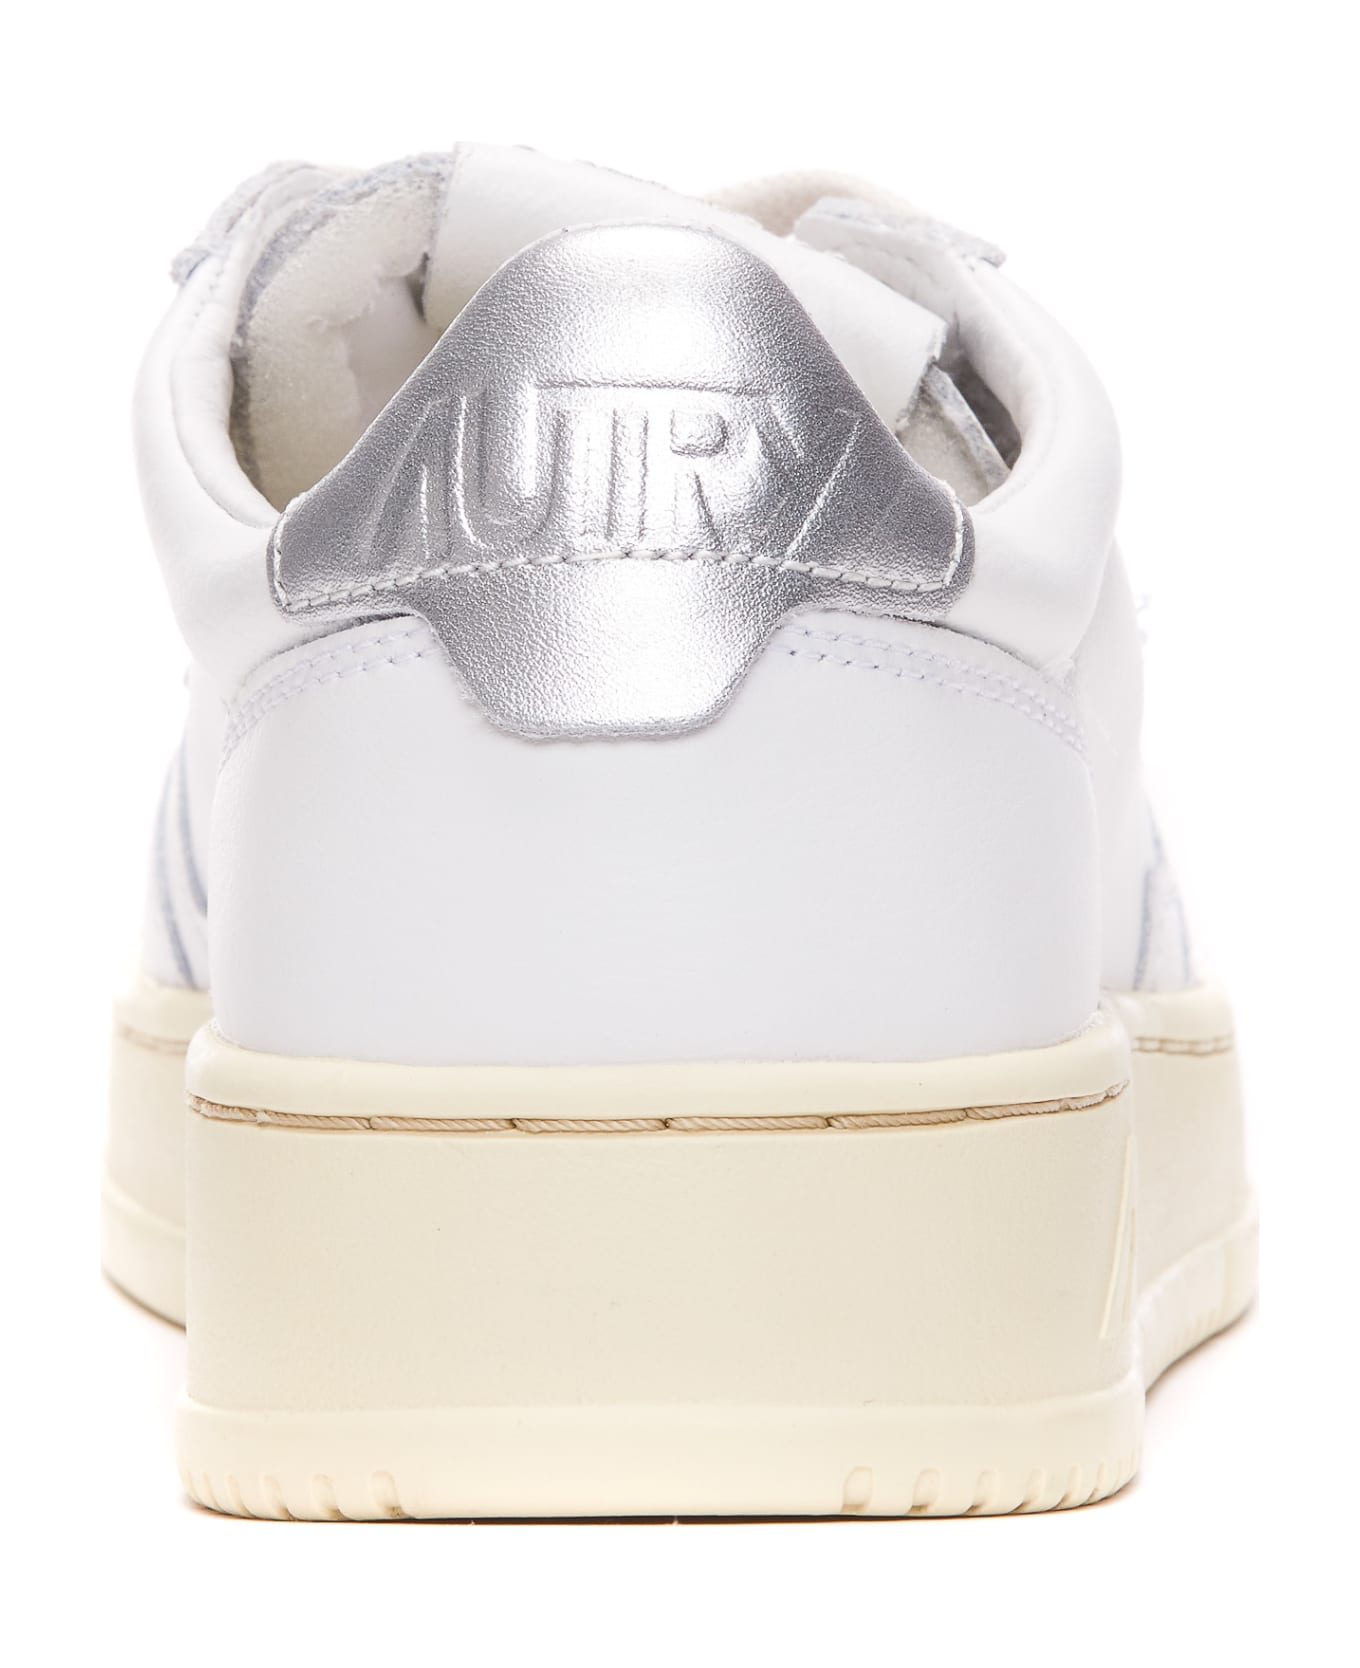 Autry Medalist Sneakers - Wht/silver